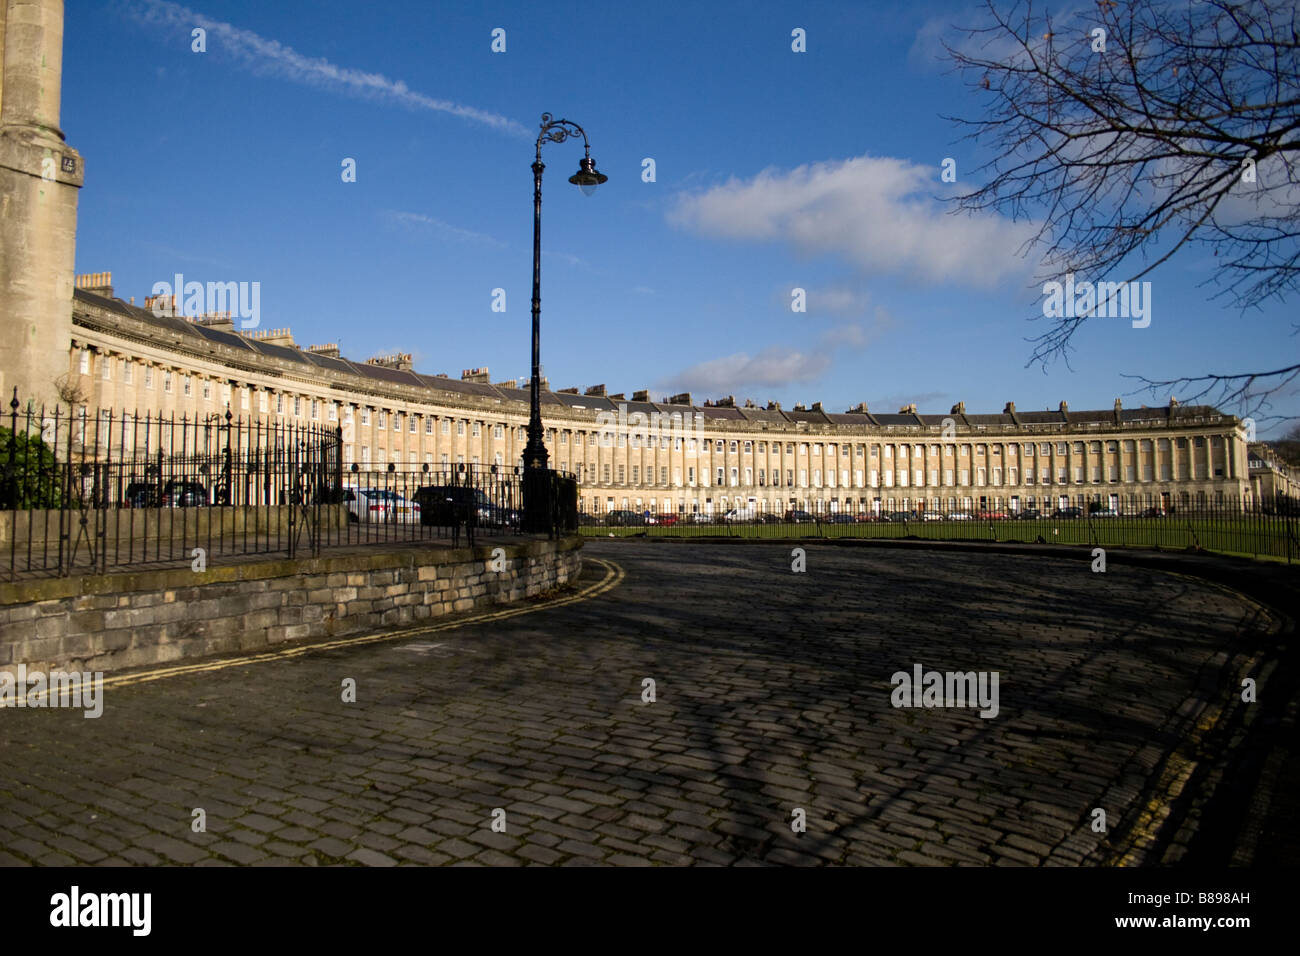 Royal Crescent in the city of Bath, England Stock Photo